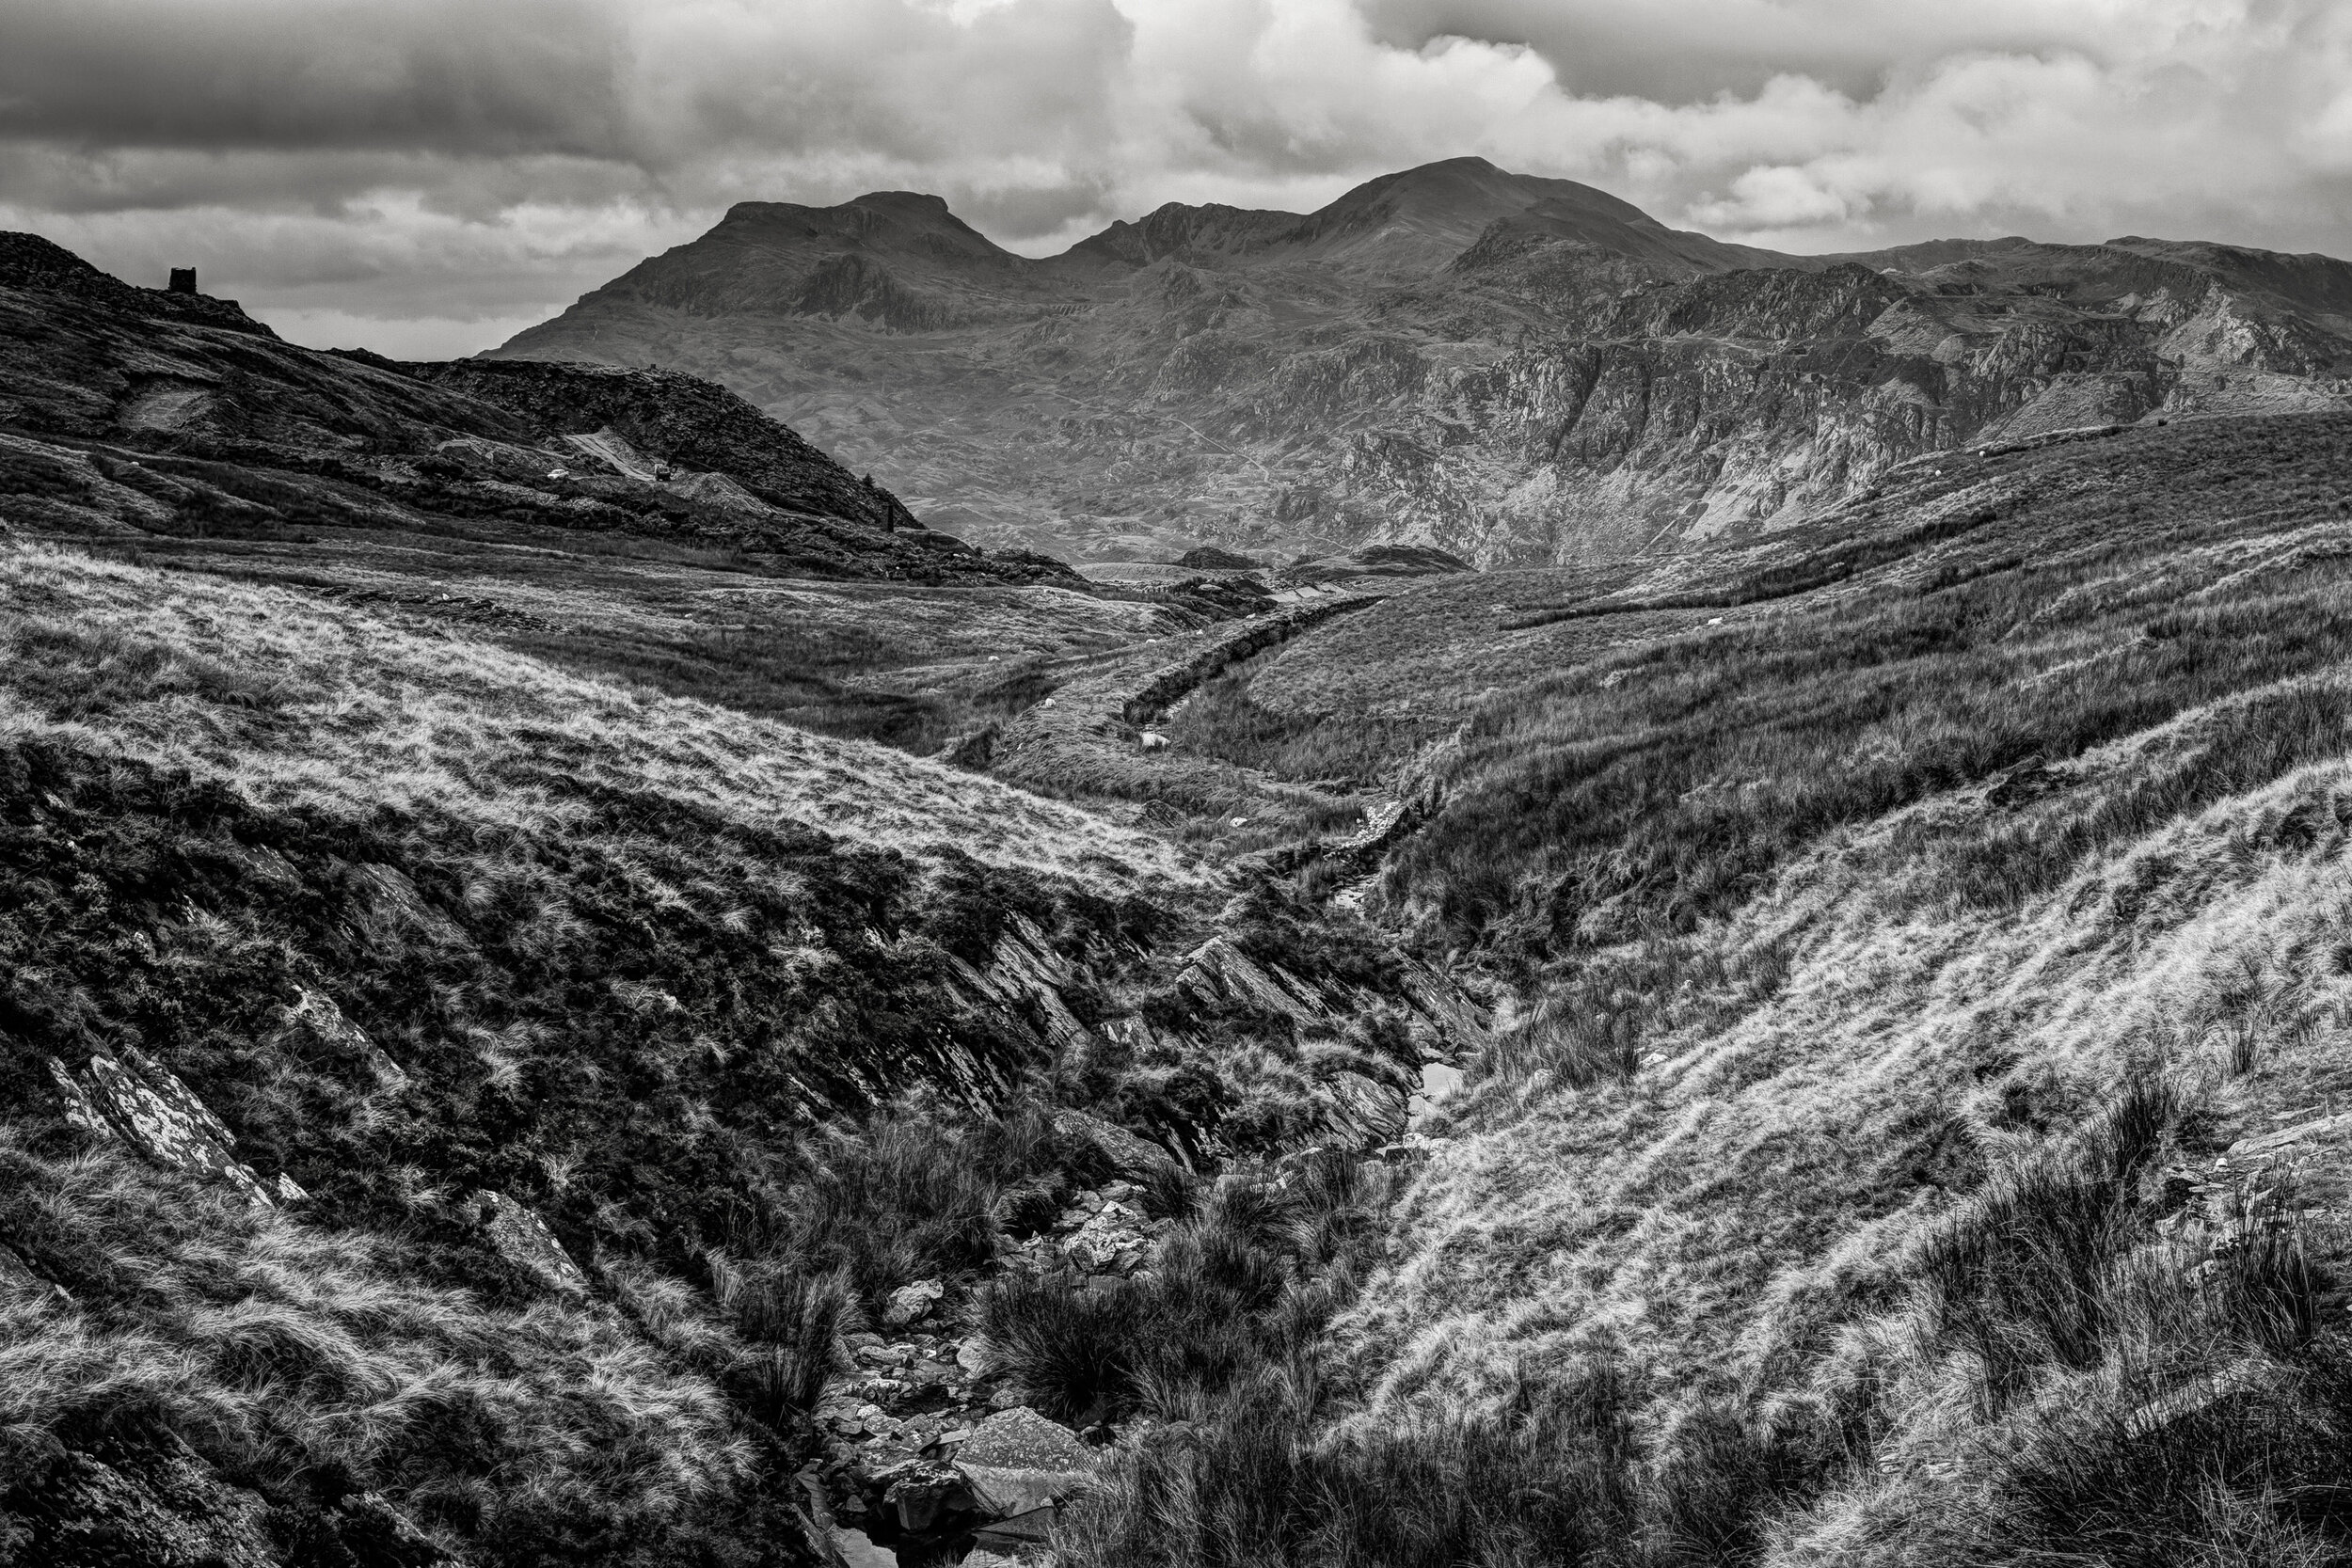 The Moelwyns from the Rhiw Bach Tramway